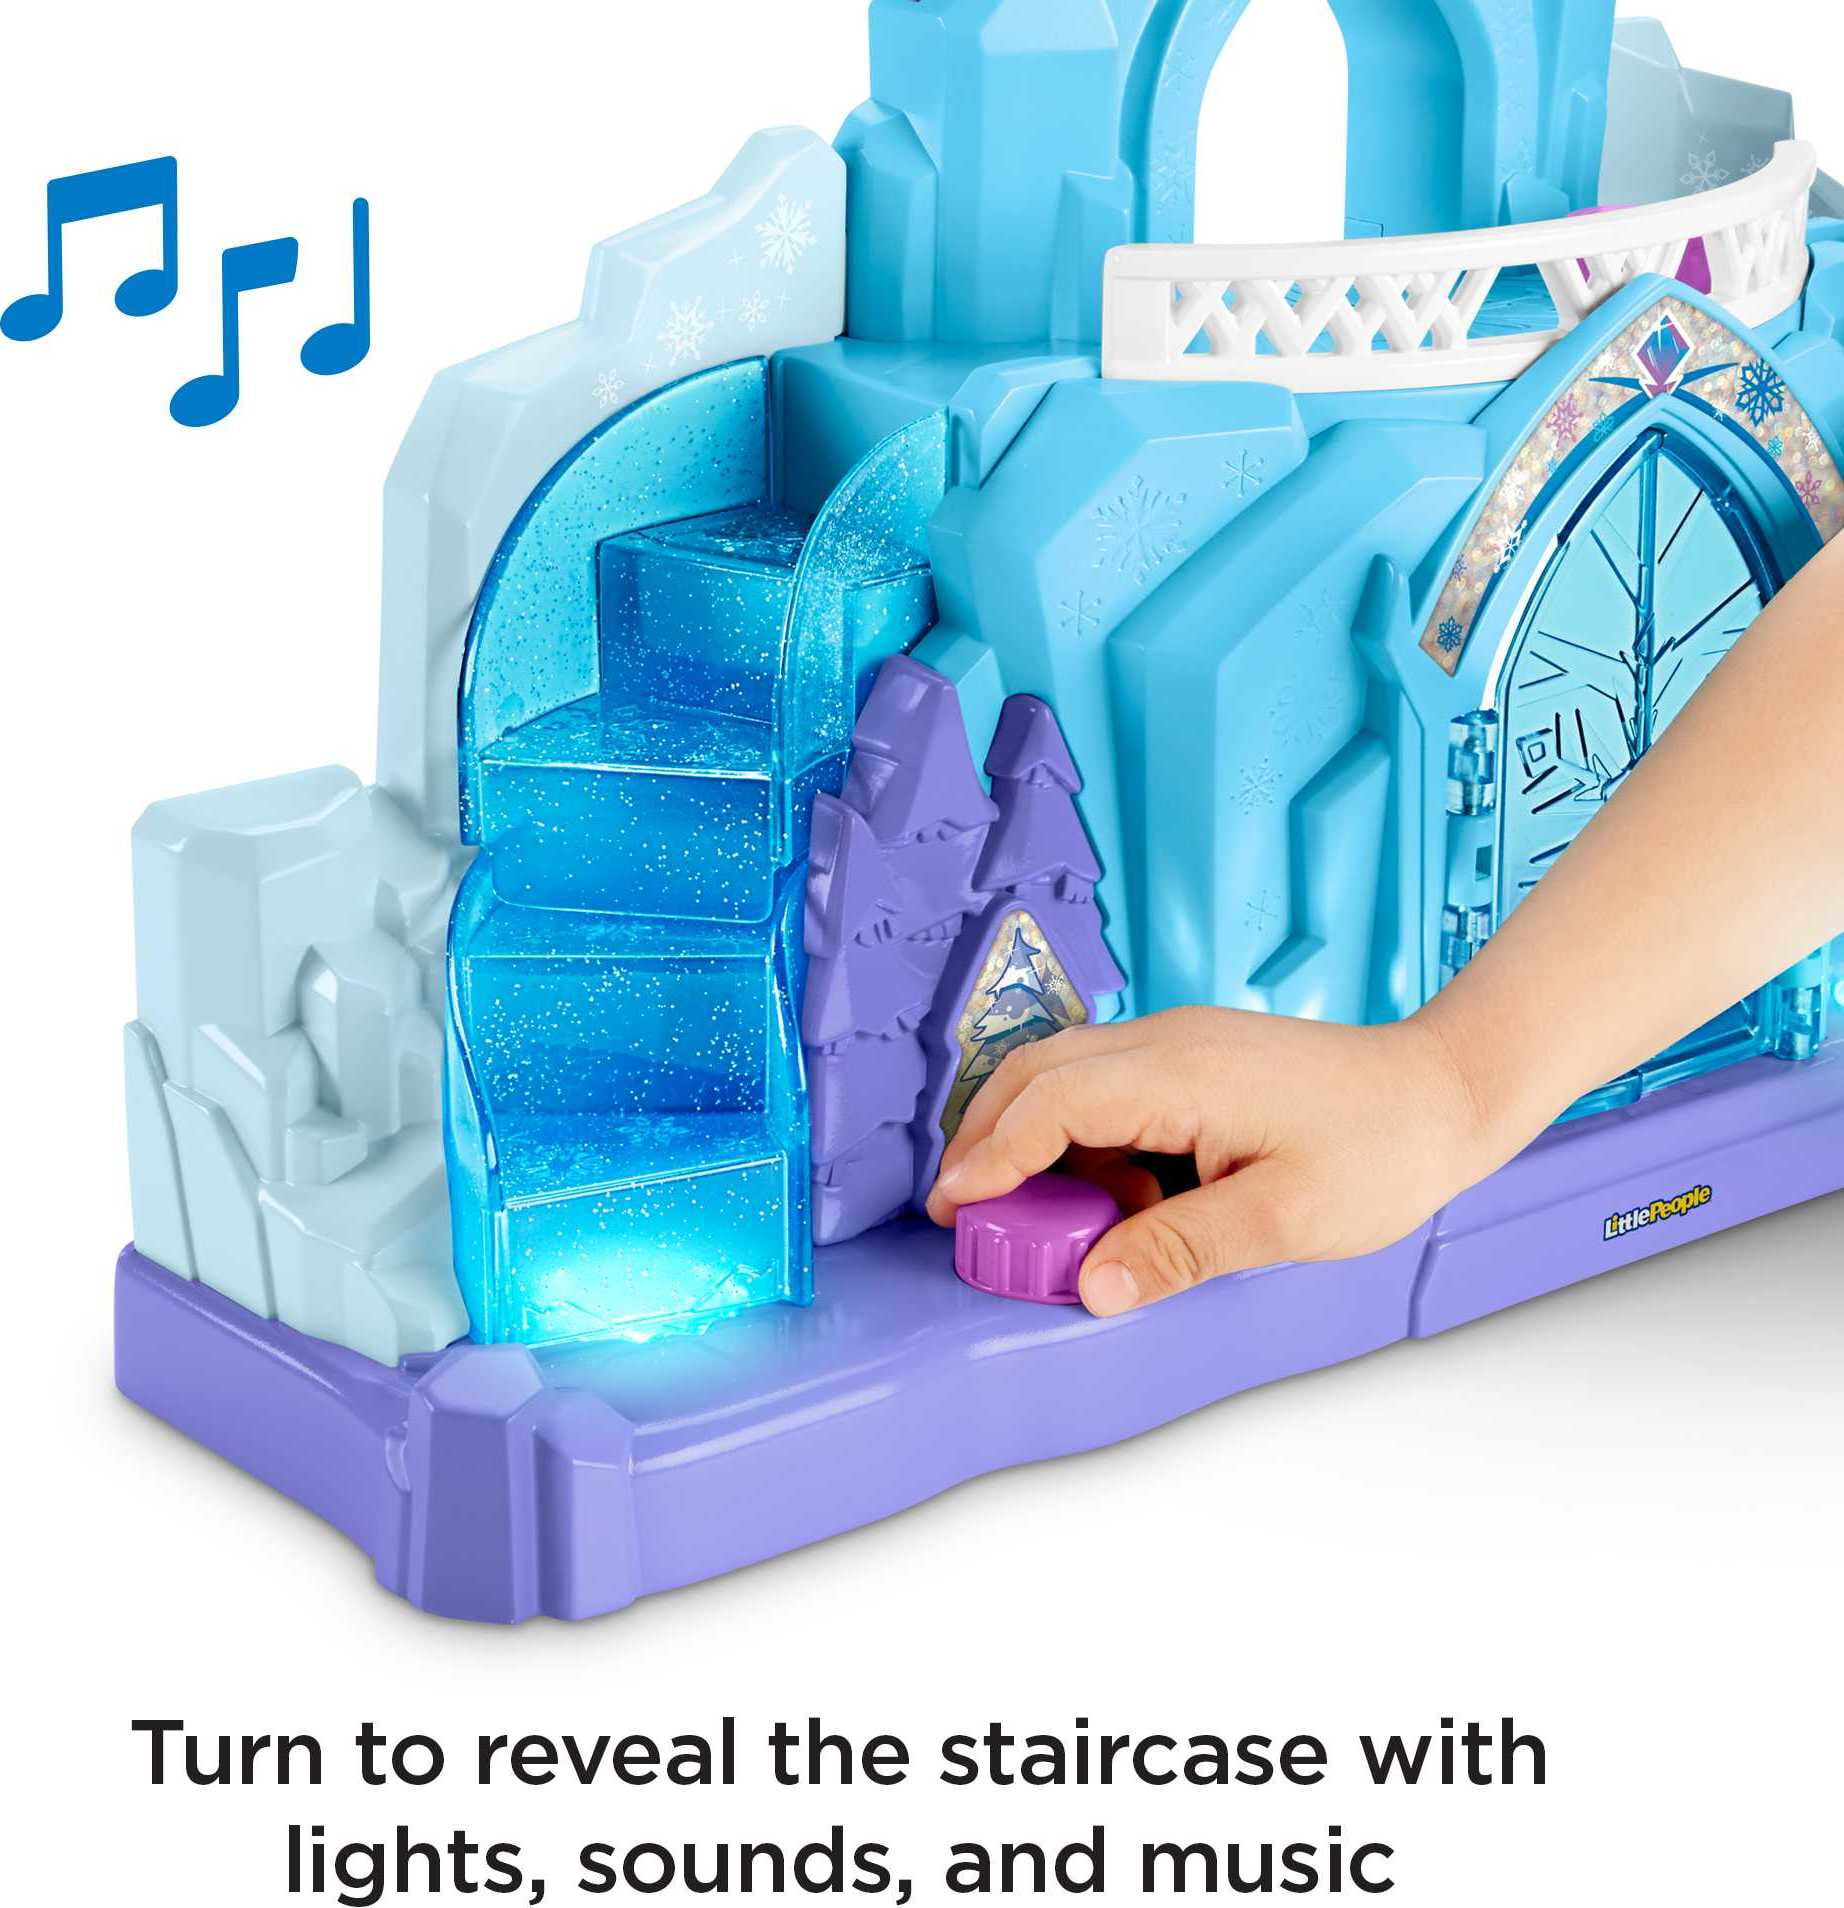 Fisher-Price Little People GGV29 Disney Frozen Elsa's Ice Palace for sale online 